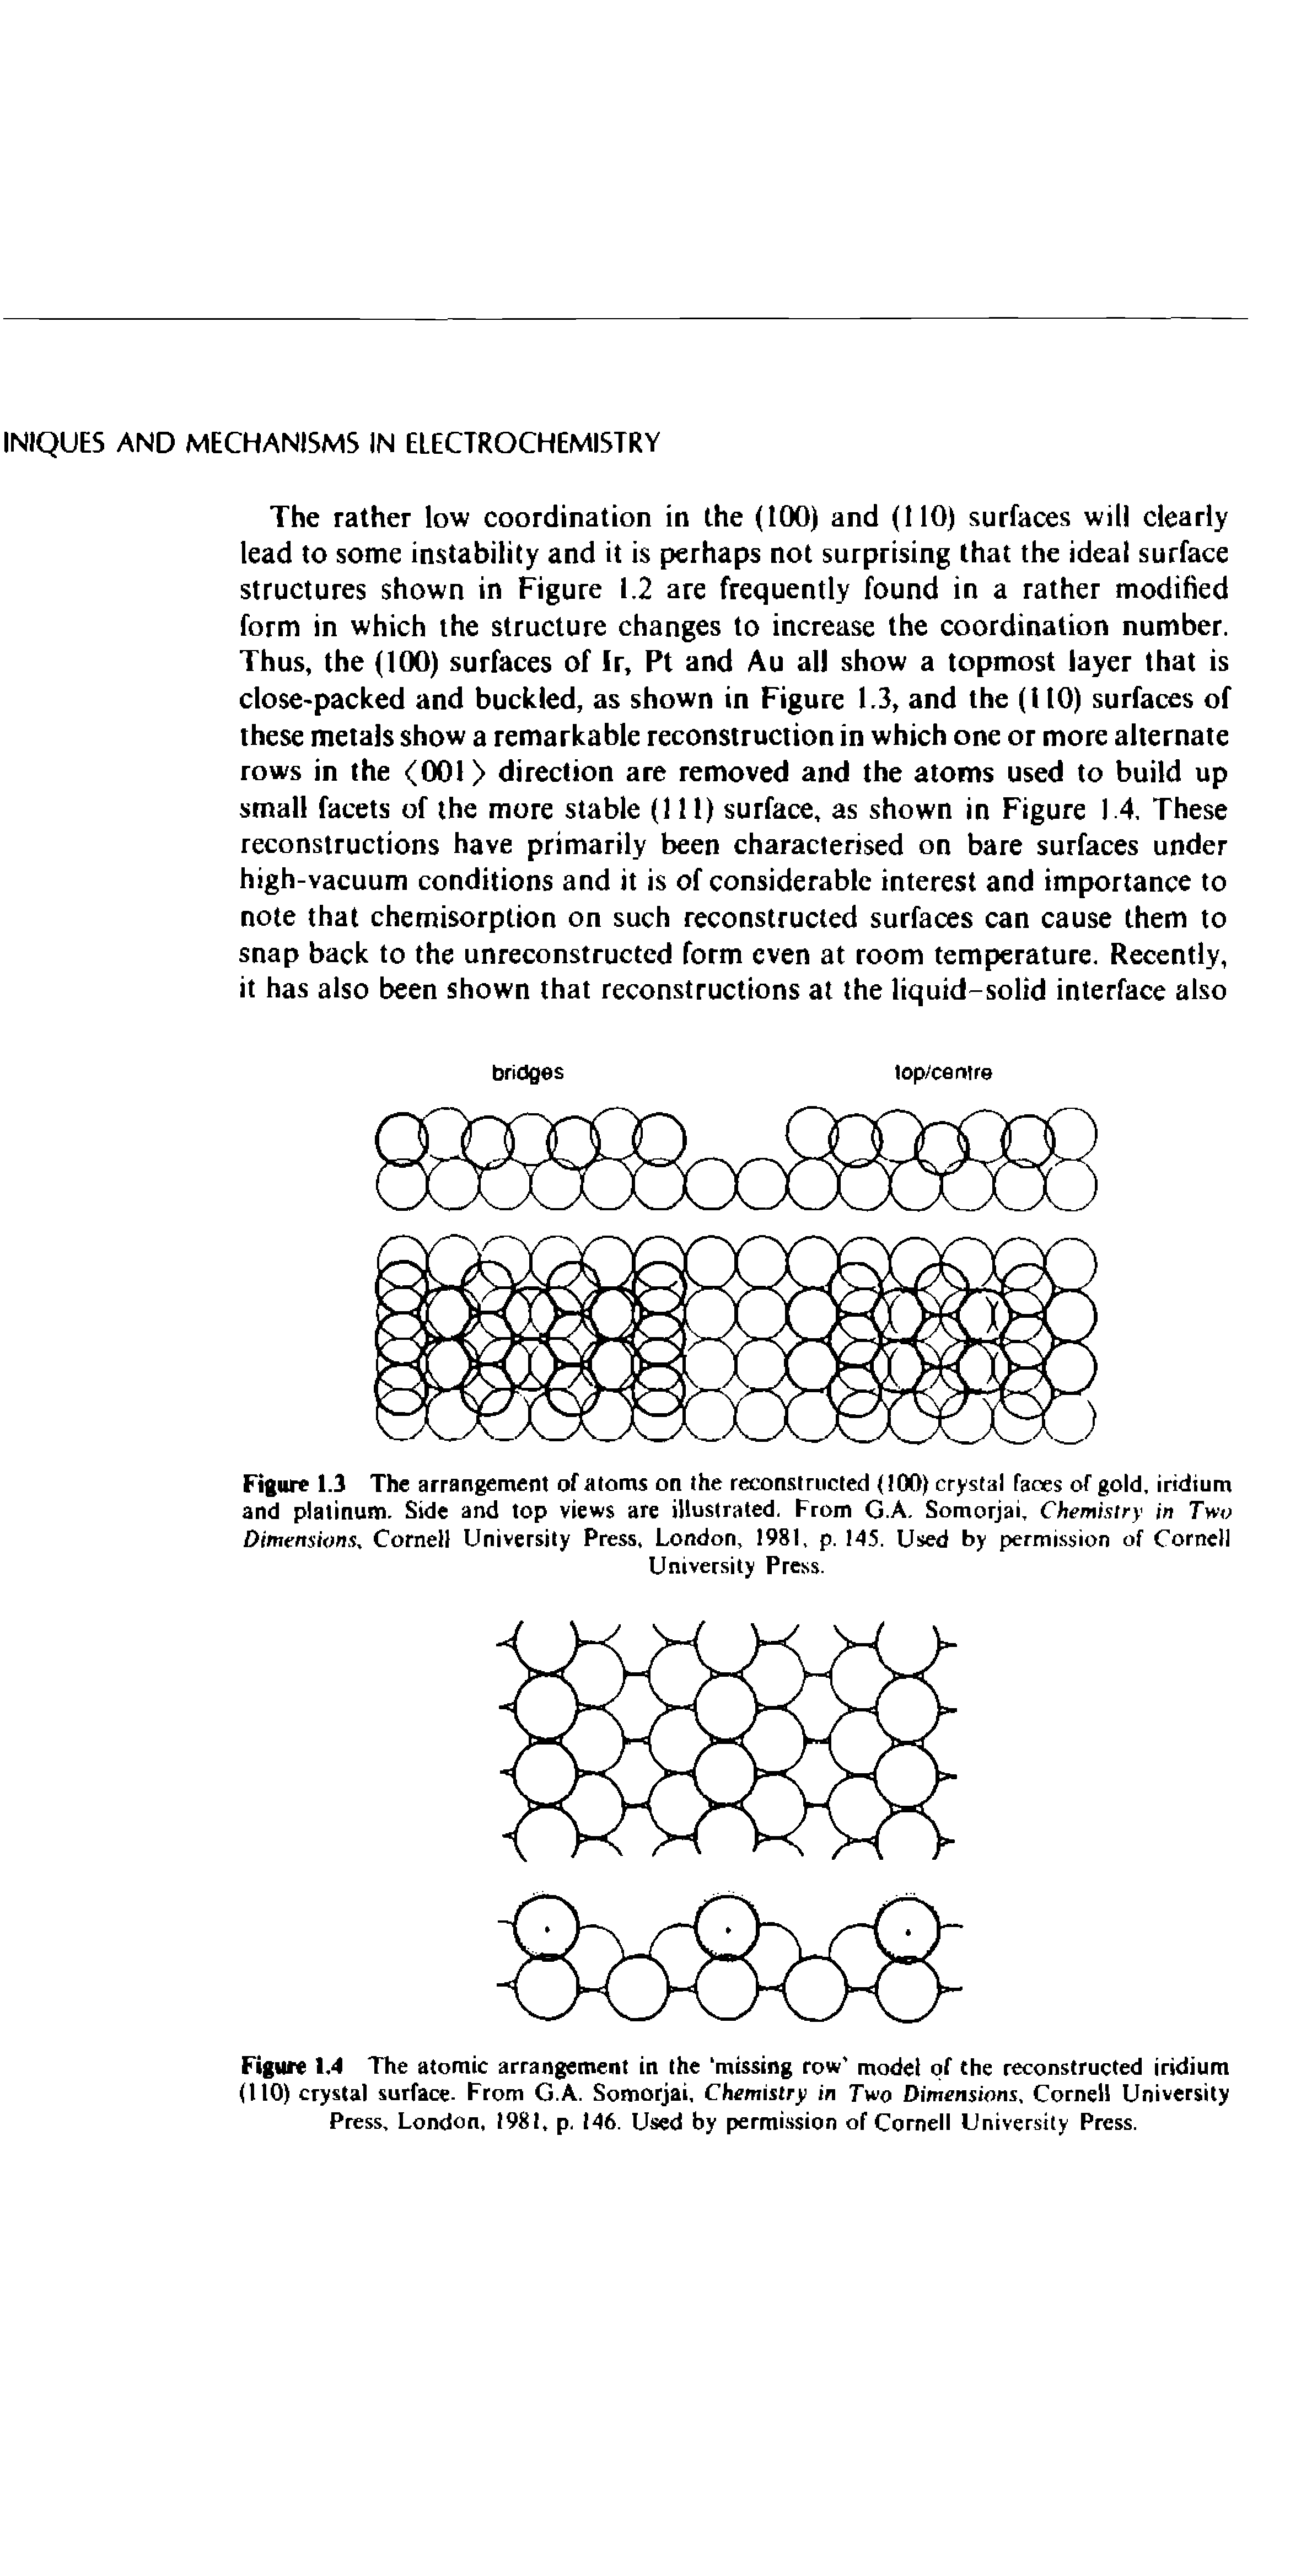 Figure 1,4 The atomic arrangement in the missing row model of the reconstructed iridium (110) crystal surface. From G.A. Somorjai, Chemistry in Two Dimensions, Cornell University Press, London, 1981, p. 146. Used by permission of Cornell University Press.